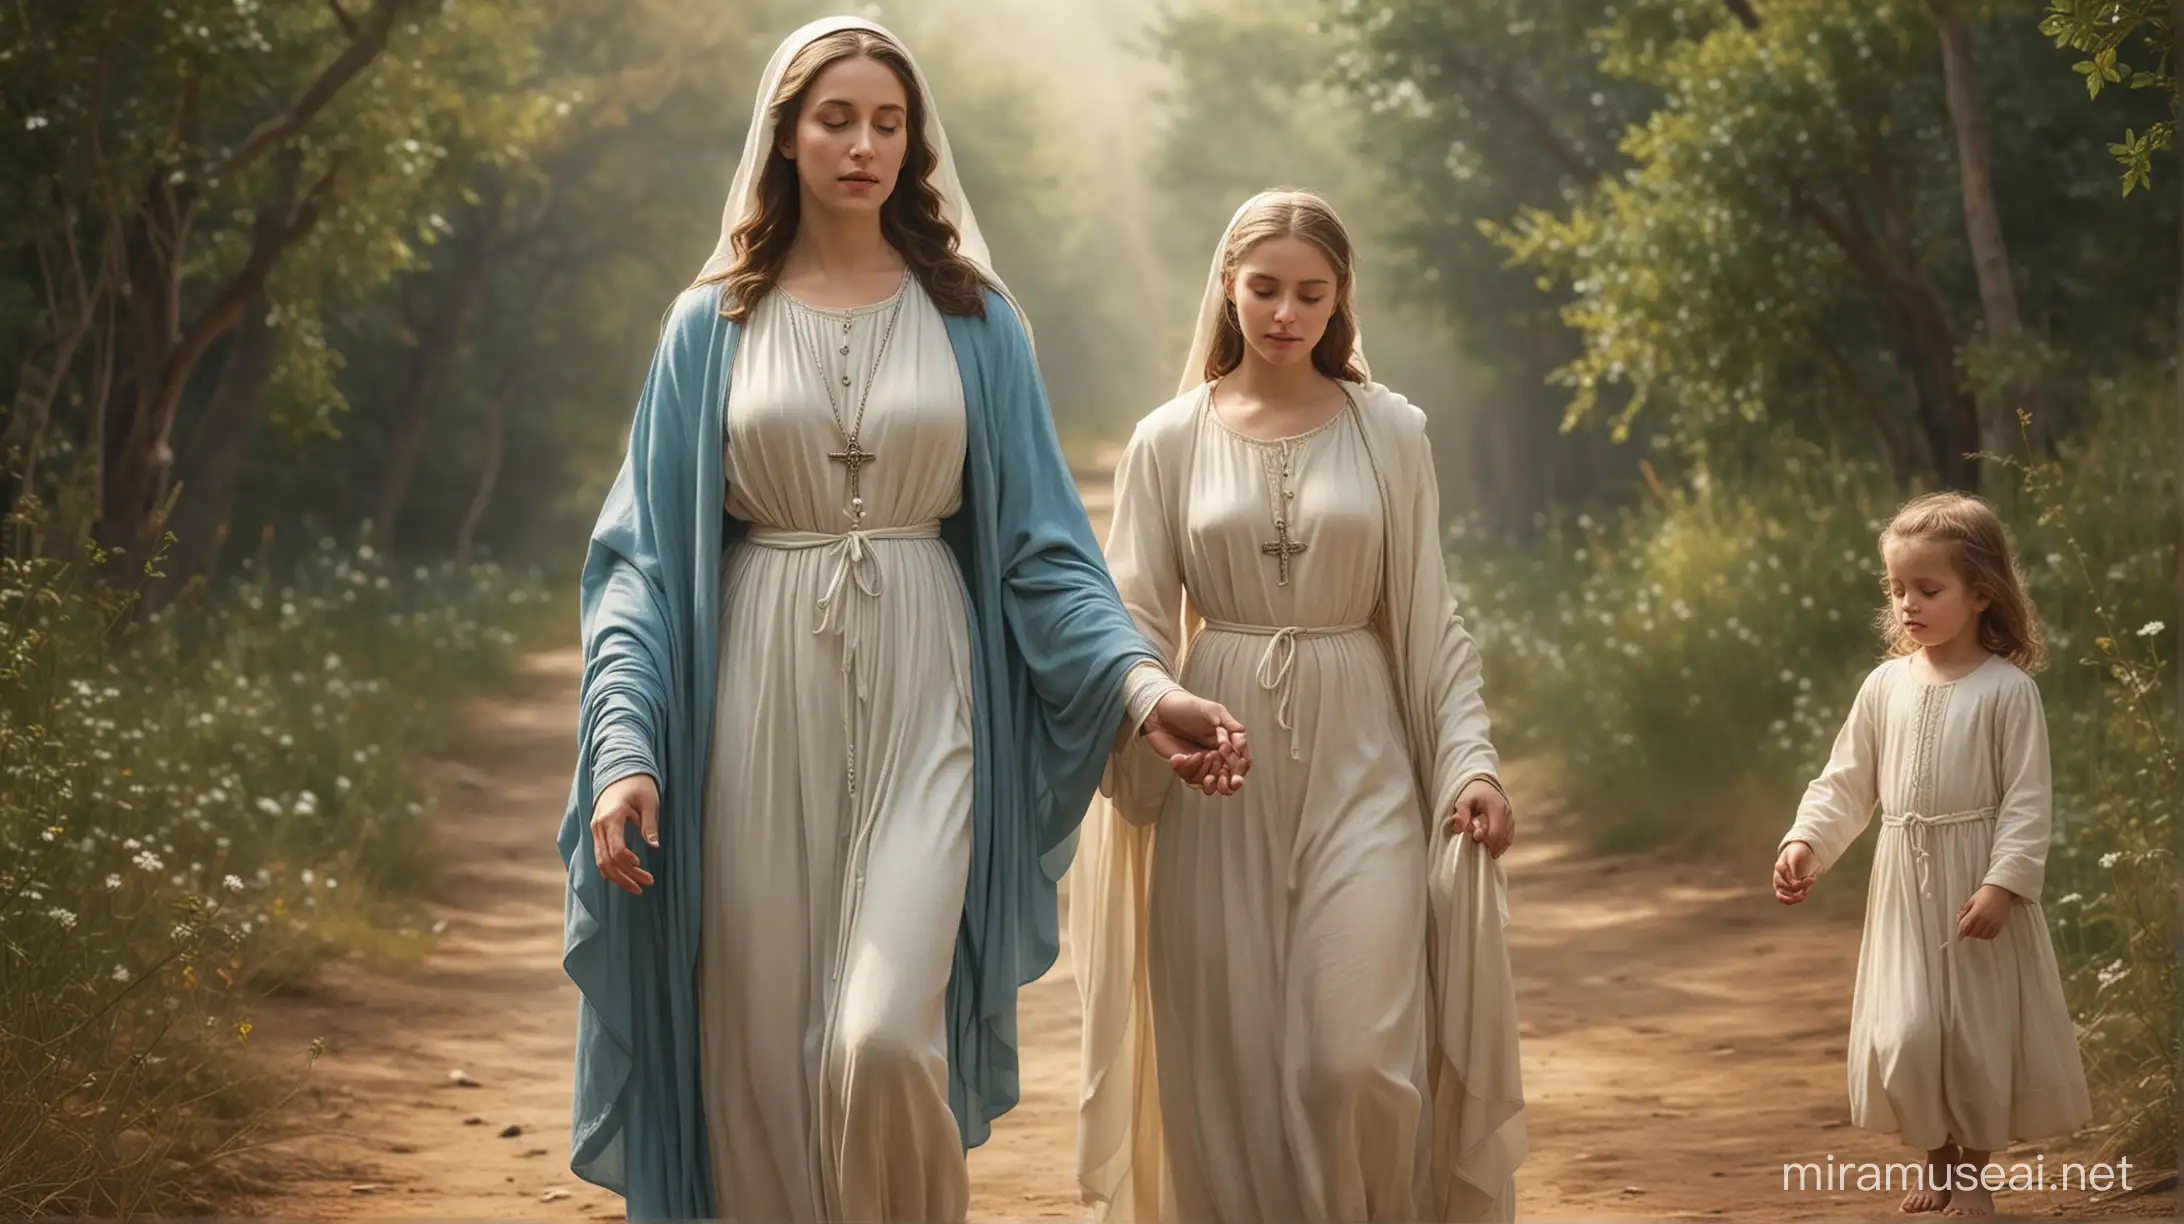 realistic image, Virgin Mary, mother of Jesus Christ, walks Young woman wearing clothing from the era corresponding to the era before Christ, but with a deep, serene look conveying peace and angelic happiness